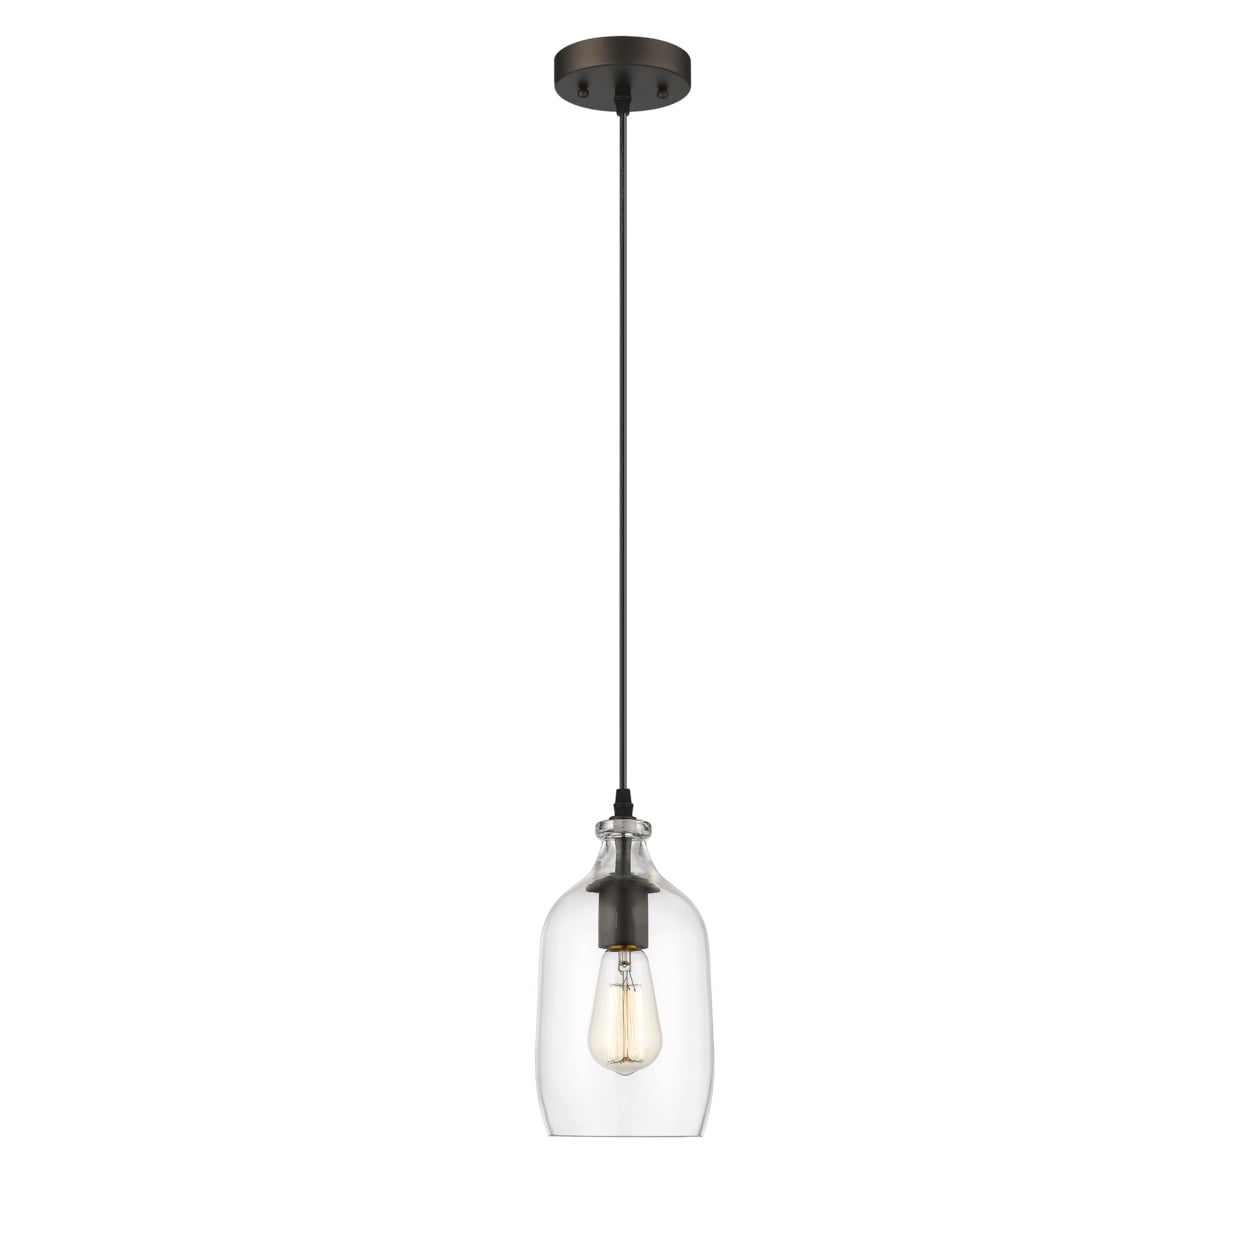 Ch2s114rb06-dp1 Athena Transitional 1 Light Rubbed Bronze Mini Ceiling Pendant - 5.5 In.